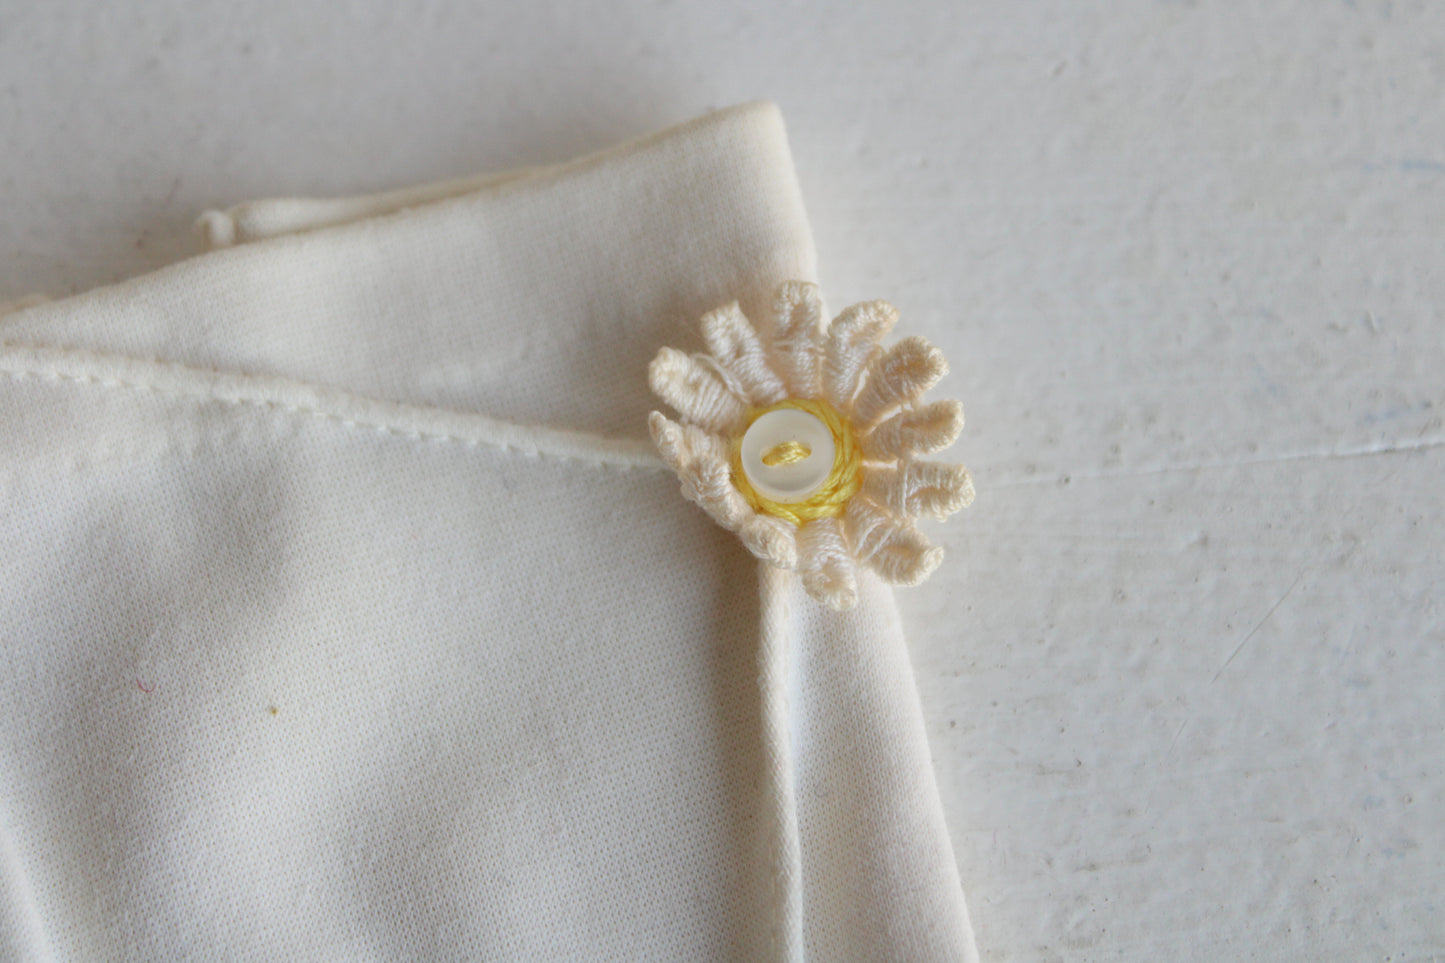 Vintage 1950s 1960s Gloves with Daisies